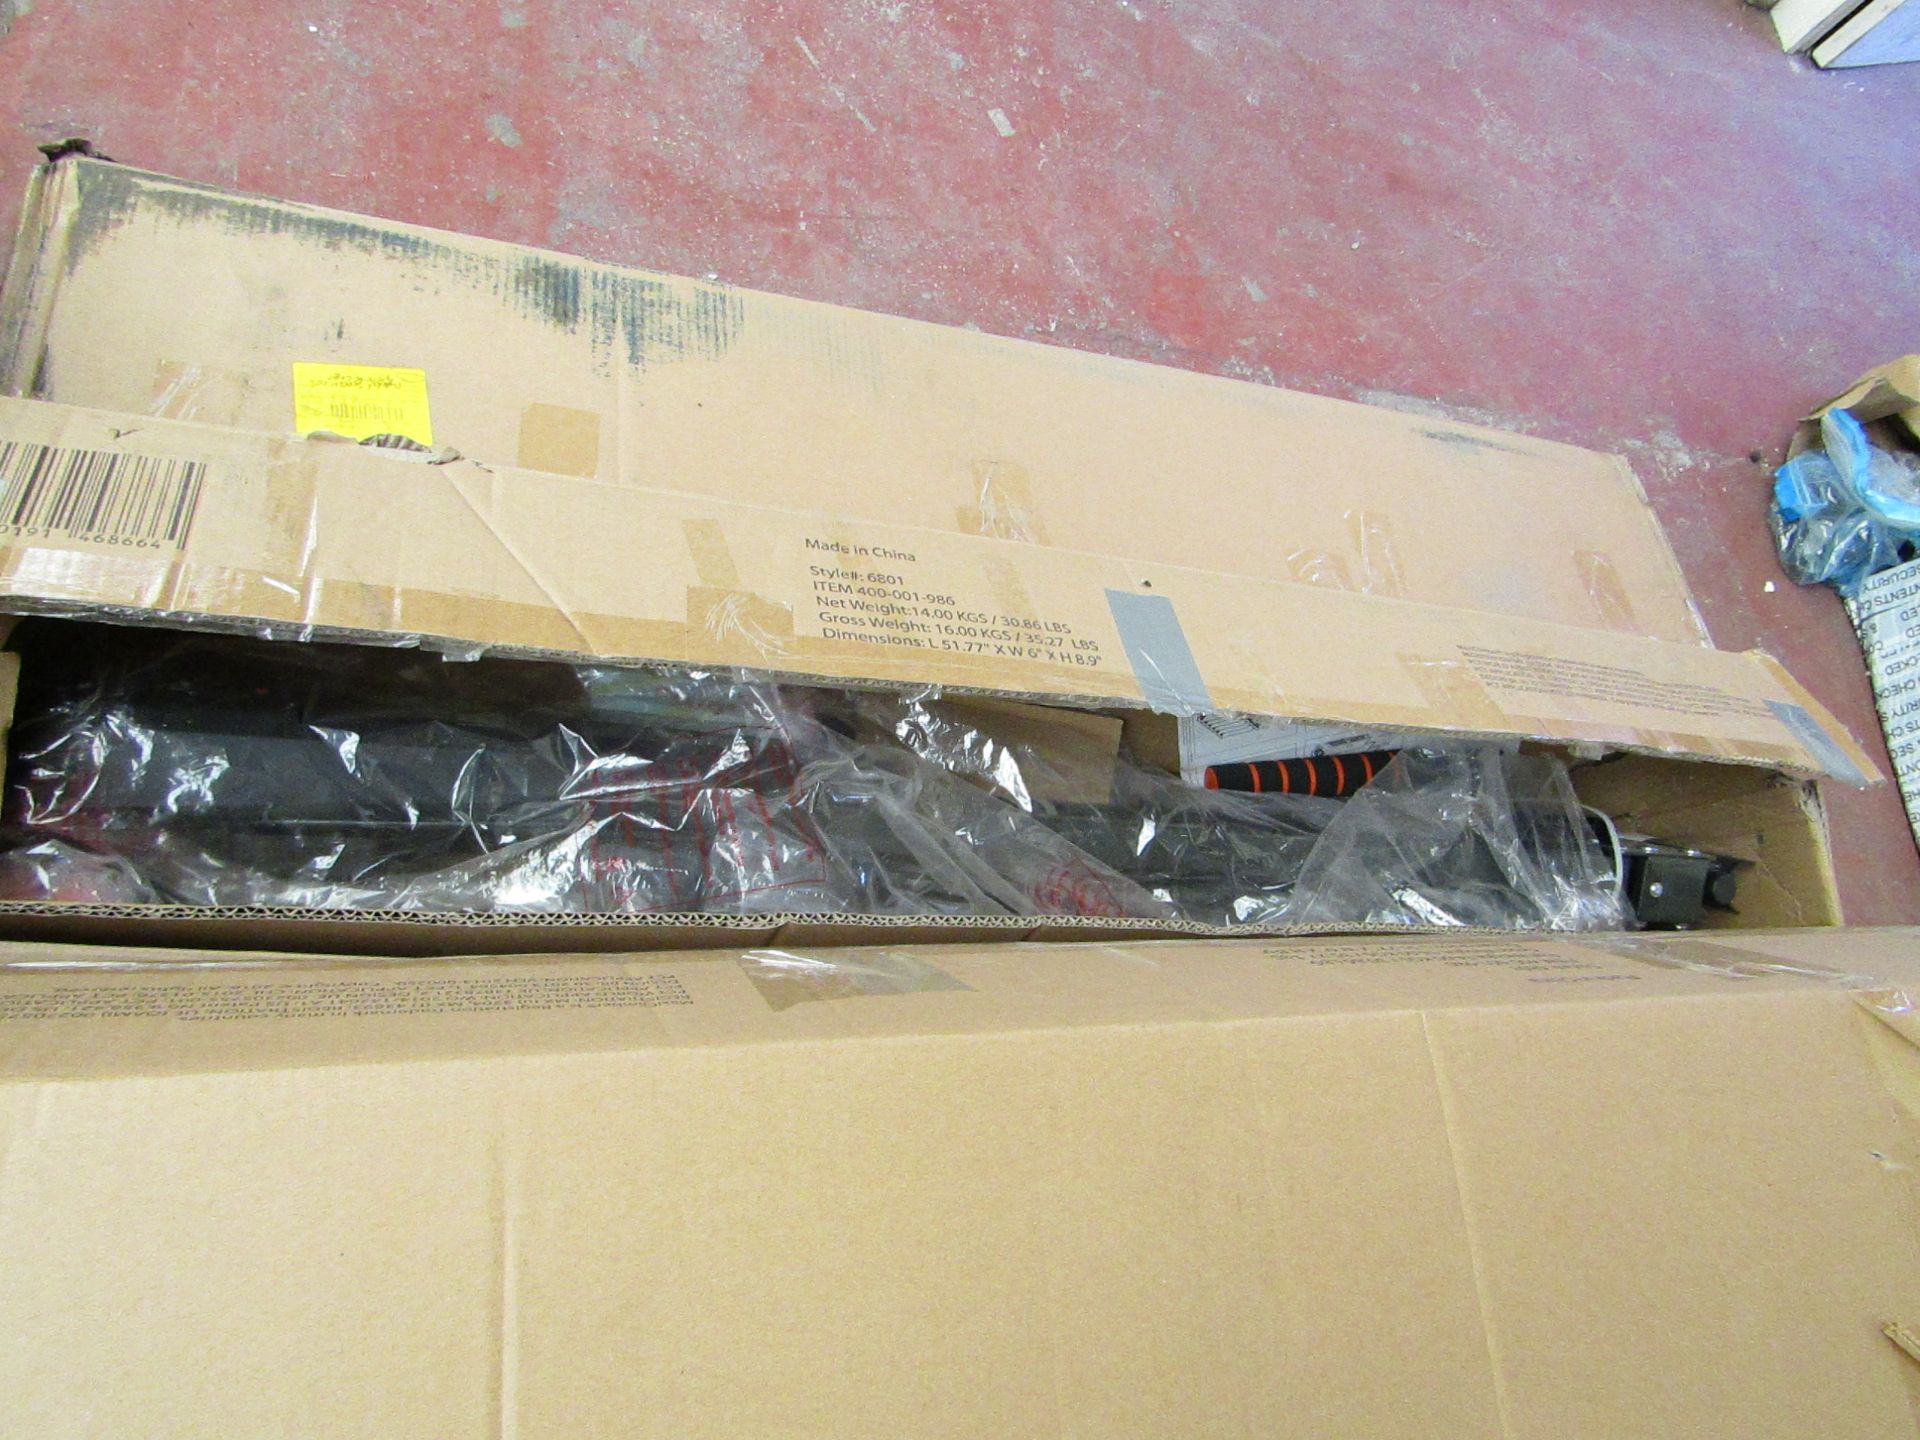 | 1X | MAXI CLIMBER | UNCHECKED AND BOXED | NO ONLINE RE-SALE | SKU - | RRP £109.99 | TOTAL LOT